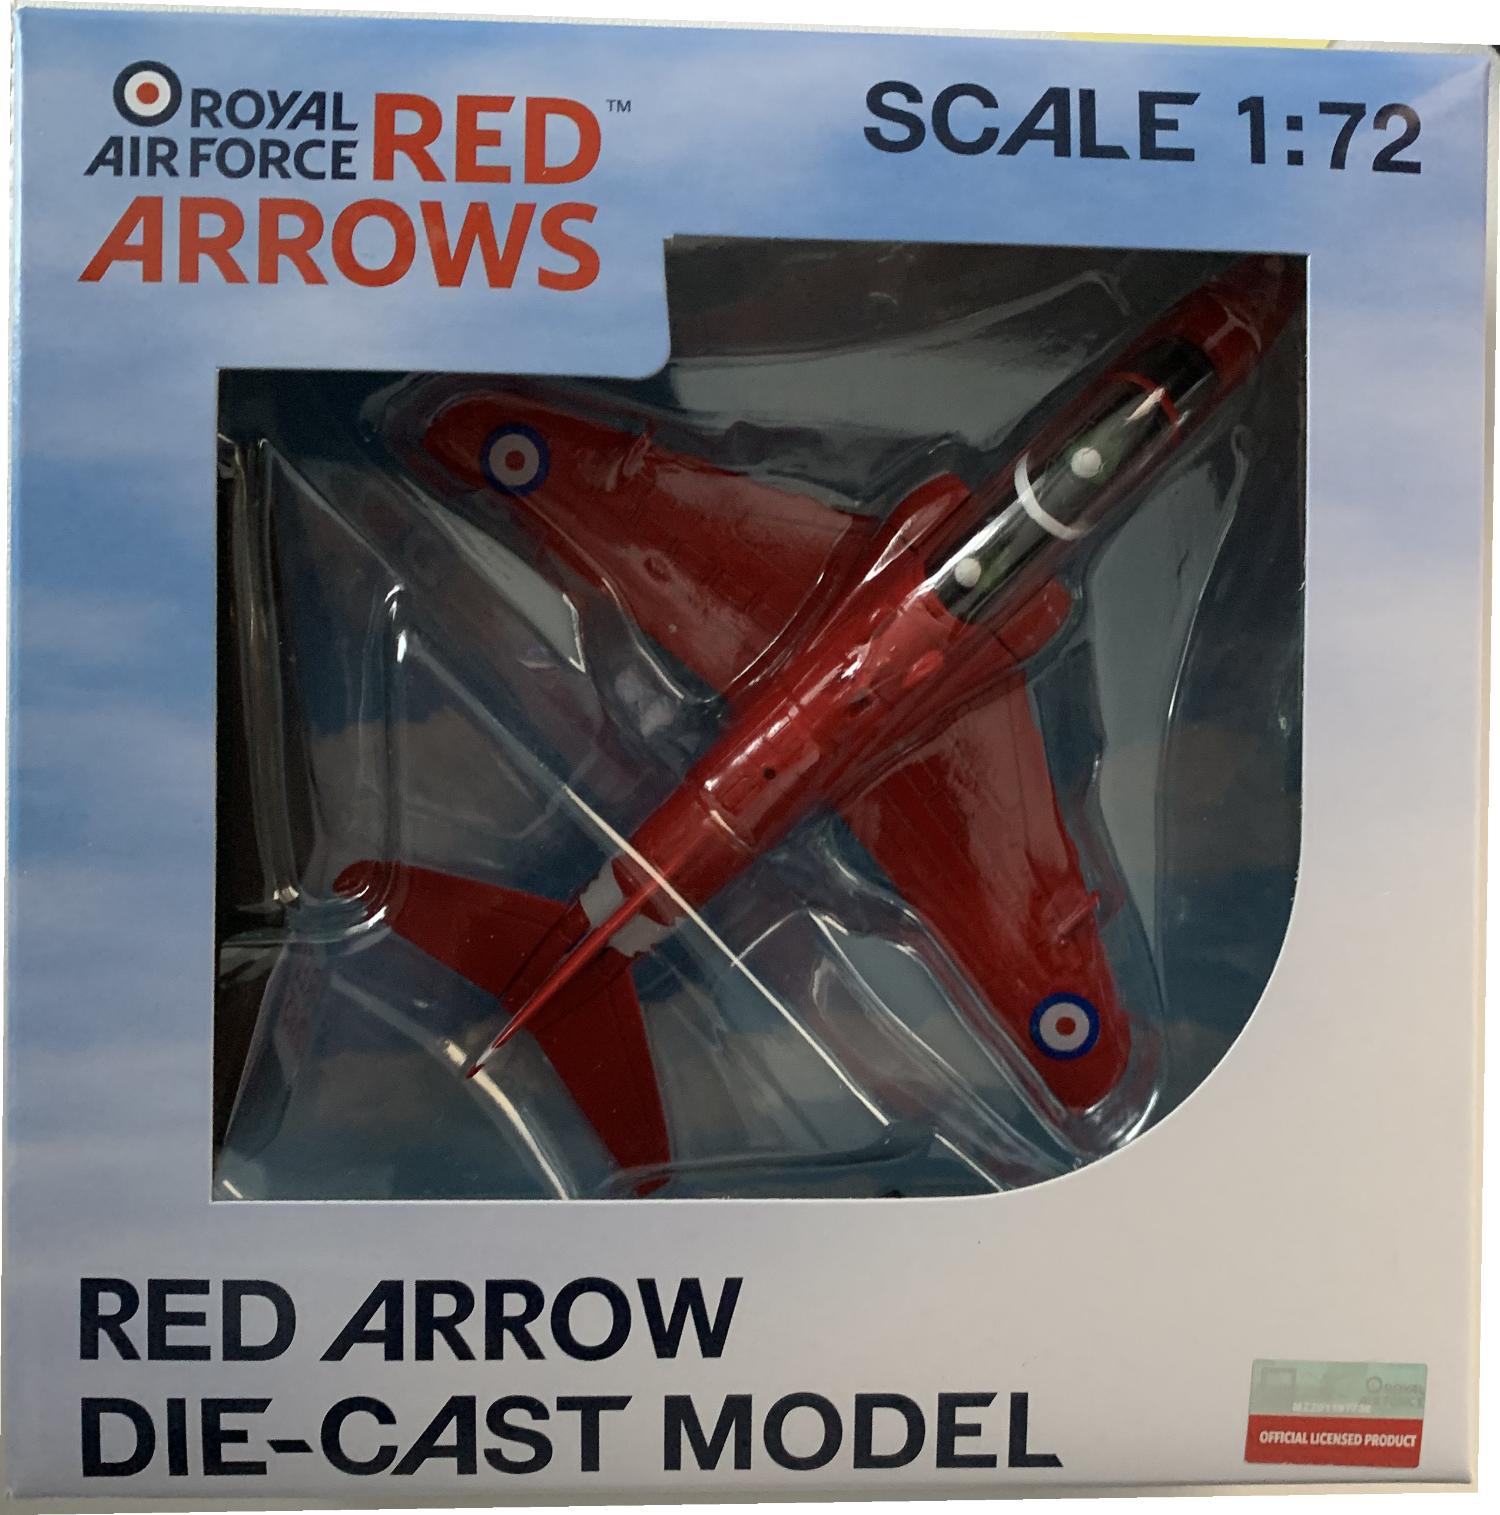 Red Arrows Bae Hawk 1:100 scale model military aircraft from PGS, RAF40608